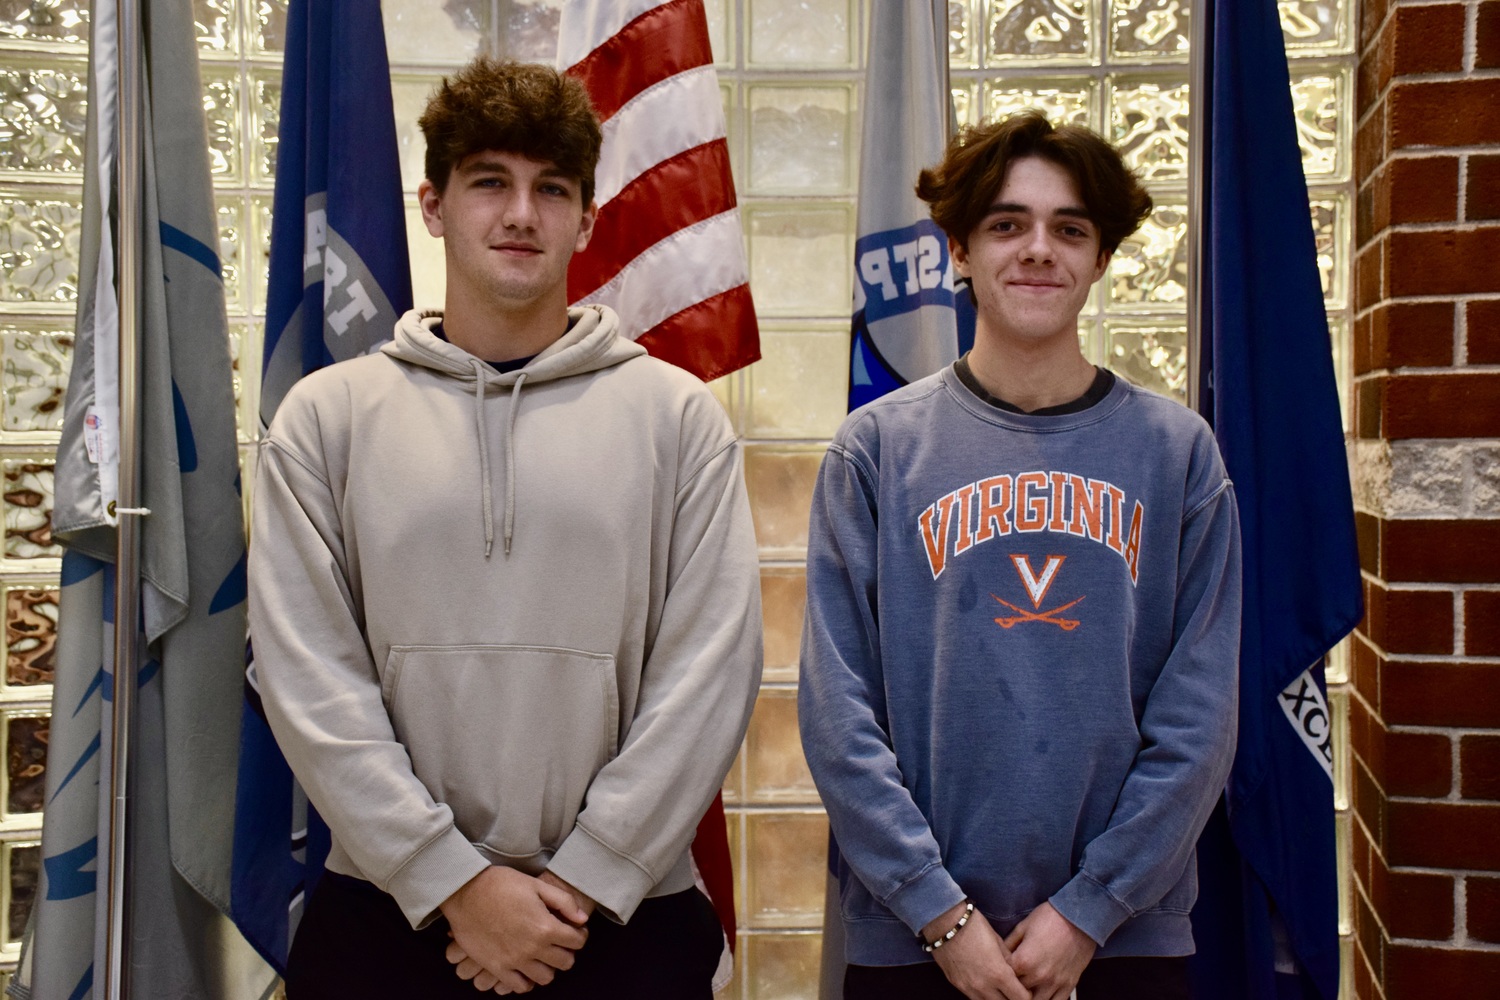 Eastport-South Manor Jr.-Sr. High School students Brody Burke, left, and Sean O’Neill were named Commended Students in the 2024 National Merit Scholarship Program. COURTESY EASTPORT-SOUTH MANOR SCHOOL DISTRICT